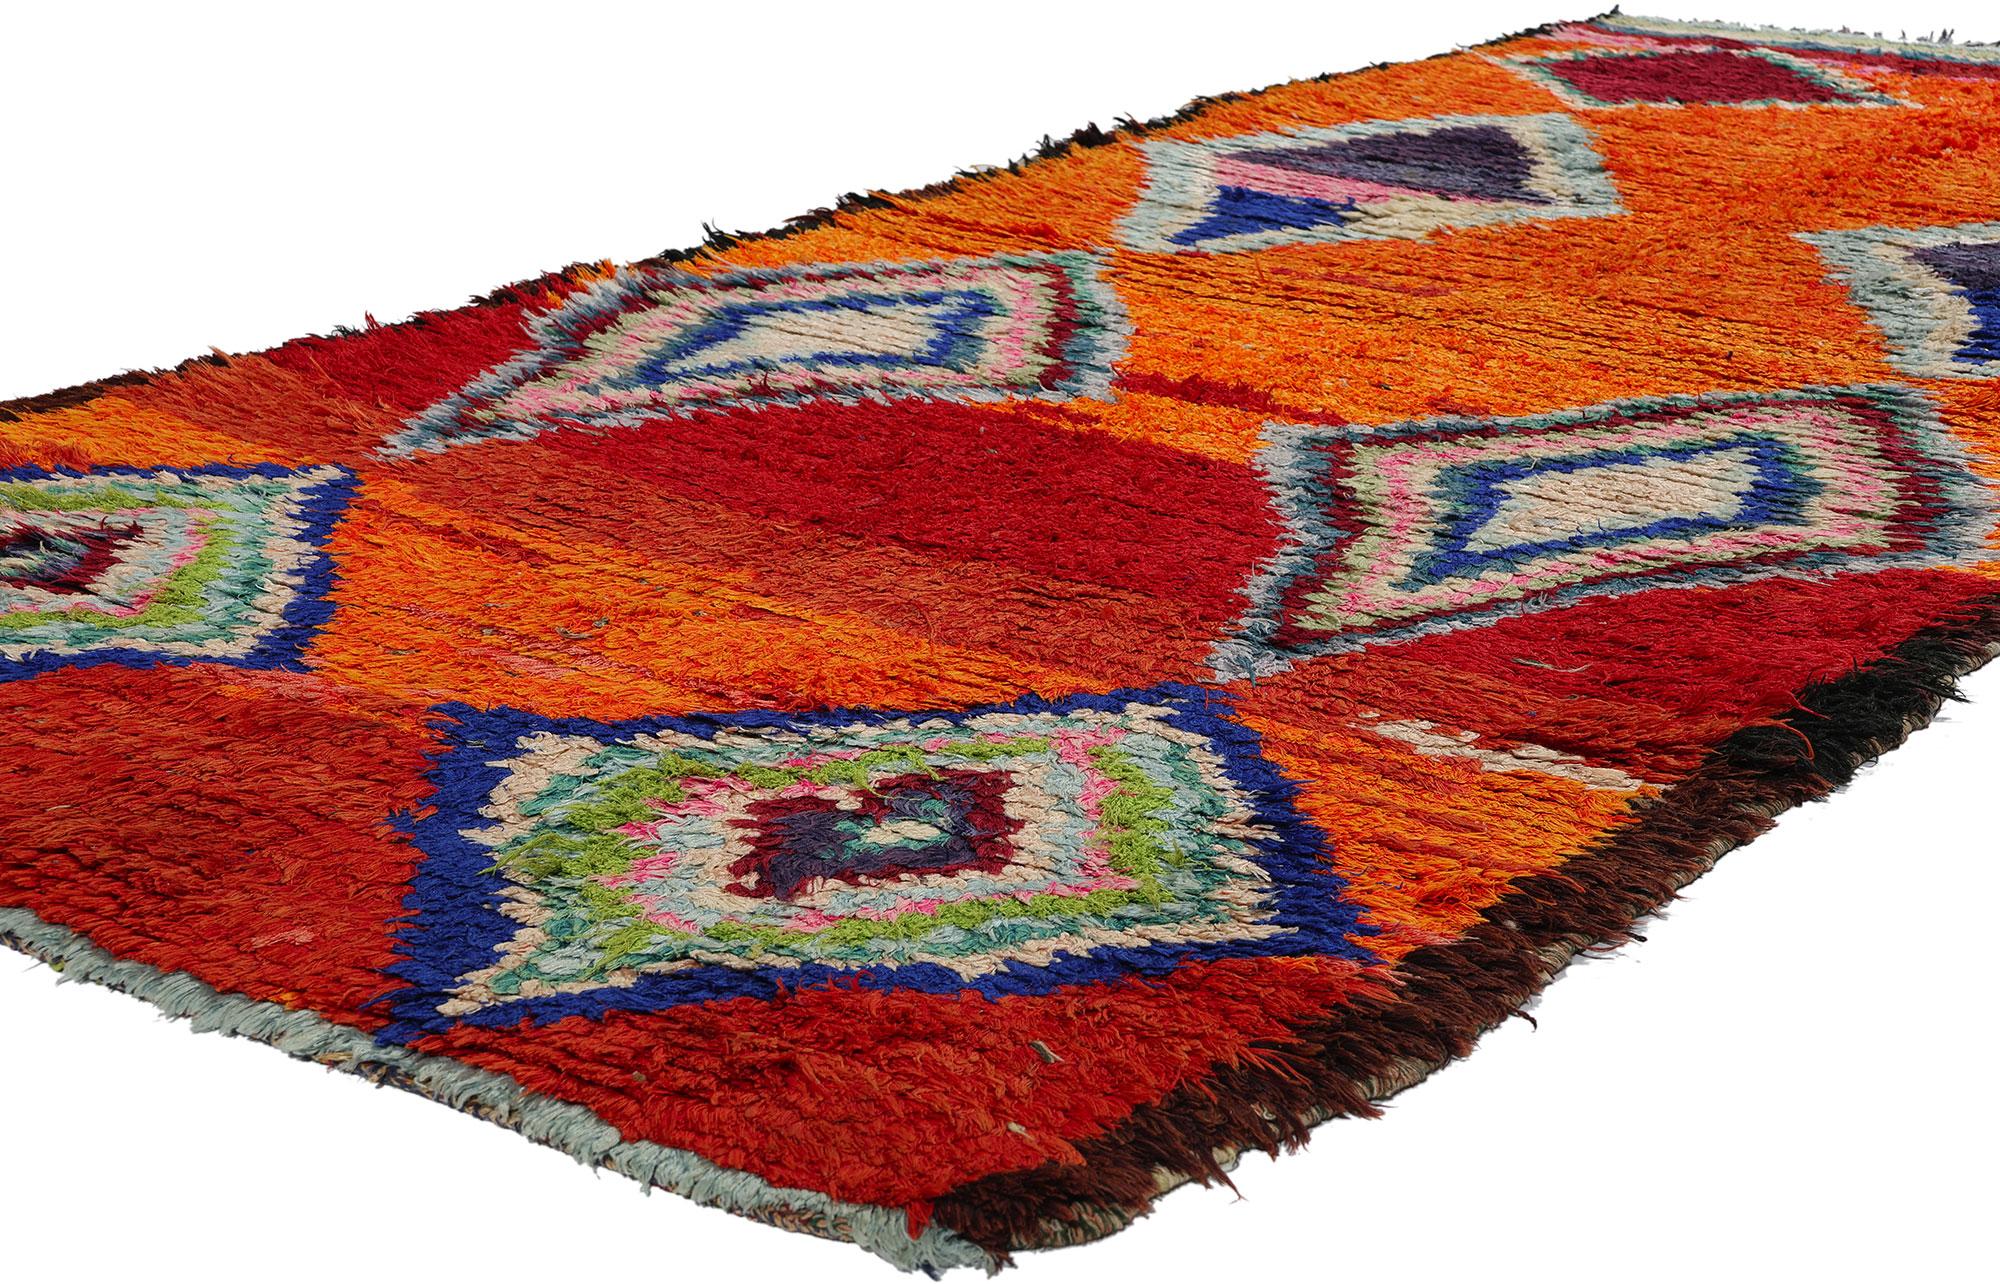 21830 Vintage Orange Boujad Moroccan Rug, 04'00 x 08'05. A Boujad rug is a handwoven rug originating from the Boujad region in the Middle Atlas Mountains of Morocco. Traditionally crafted by Berber tribes, particularly the Haouz and Rehamna tribes,